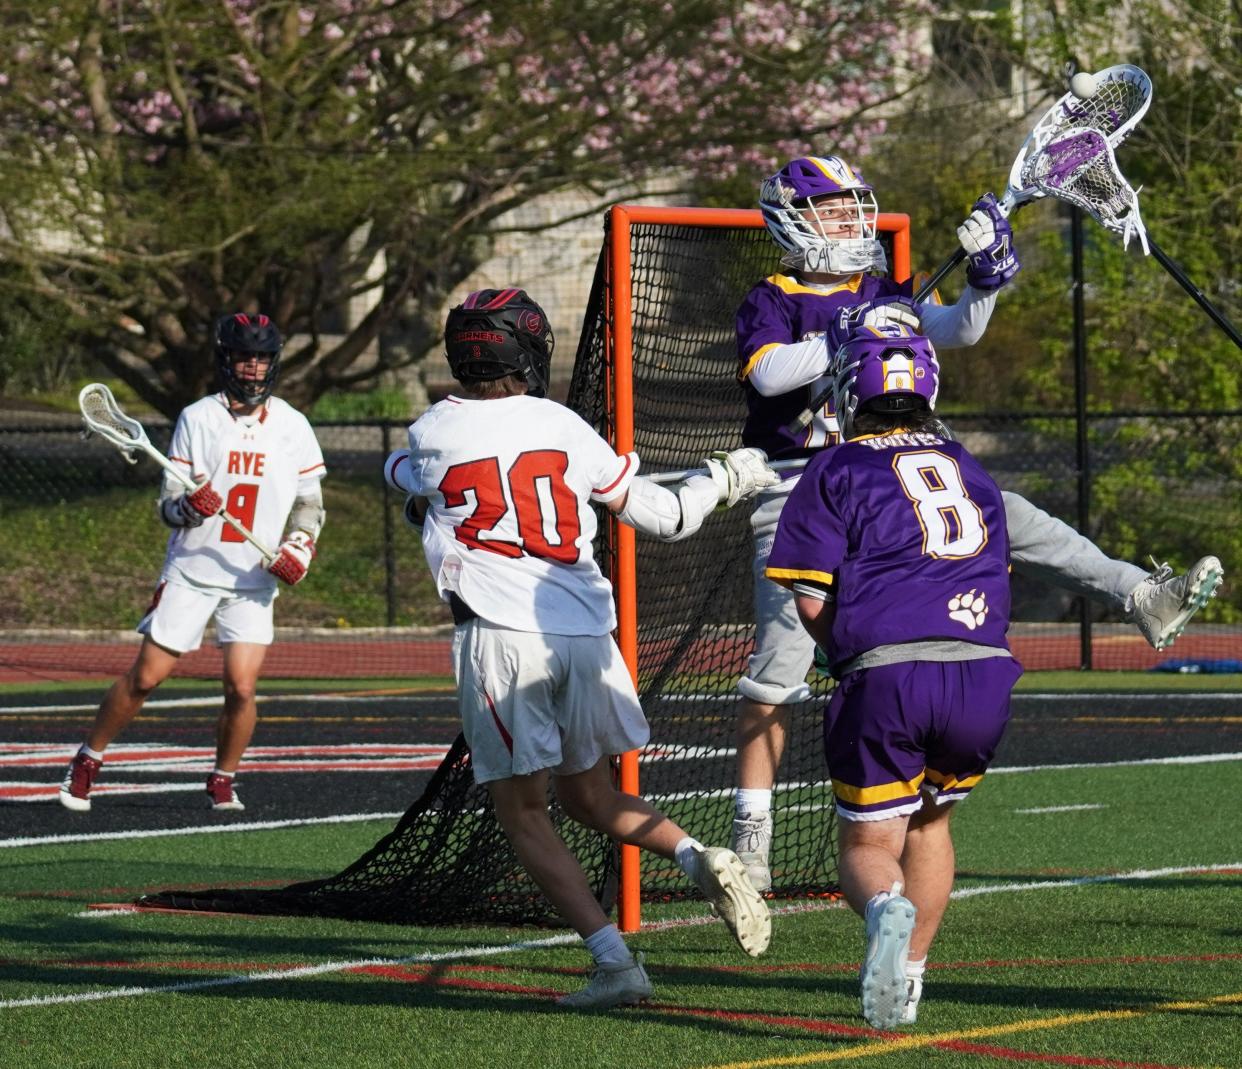 John Jay goalie Blake O'Callaghan gains control of the ball after stopping a point-blank shot from Rye attackman Garrett O'Sullivan. The Garnets went on to win 10-4 at Nugent Field on April 20, 2023.